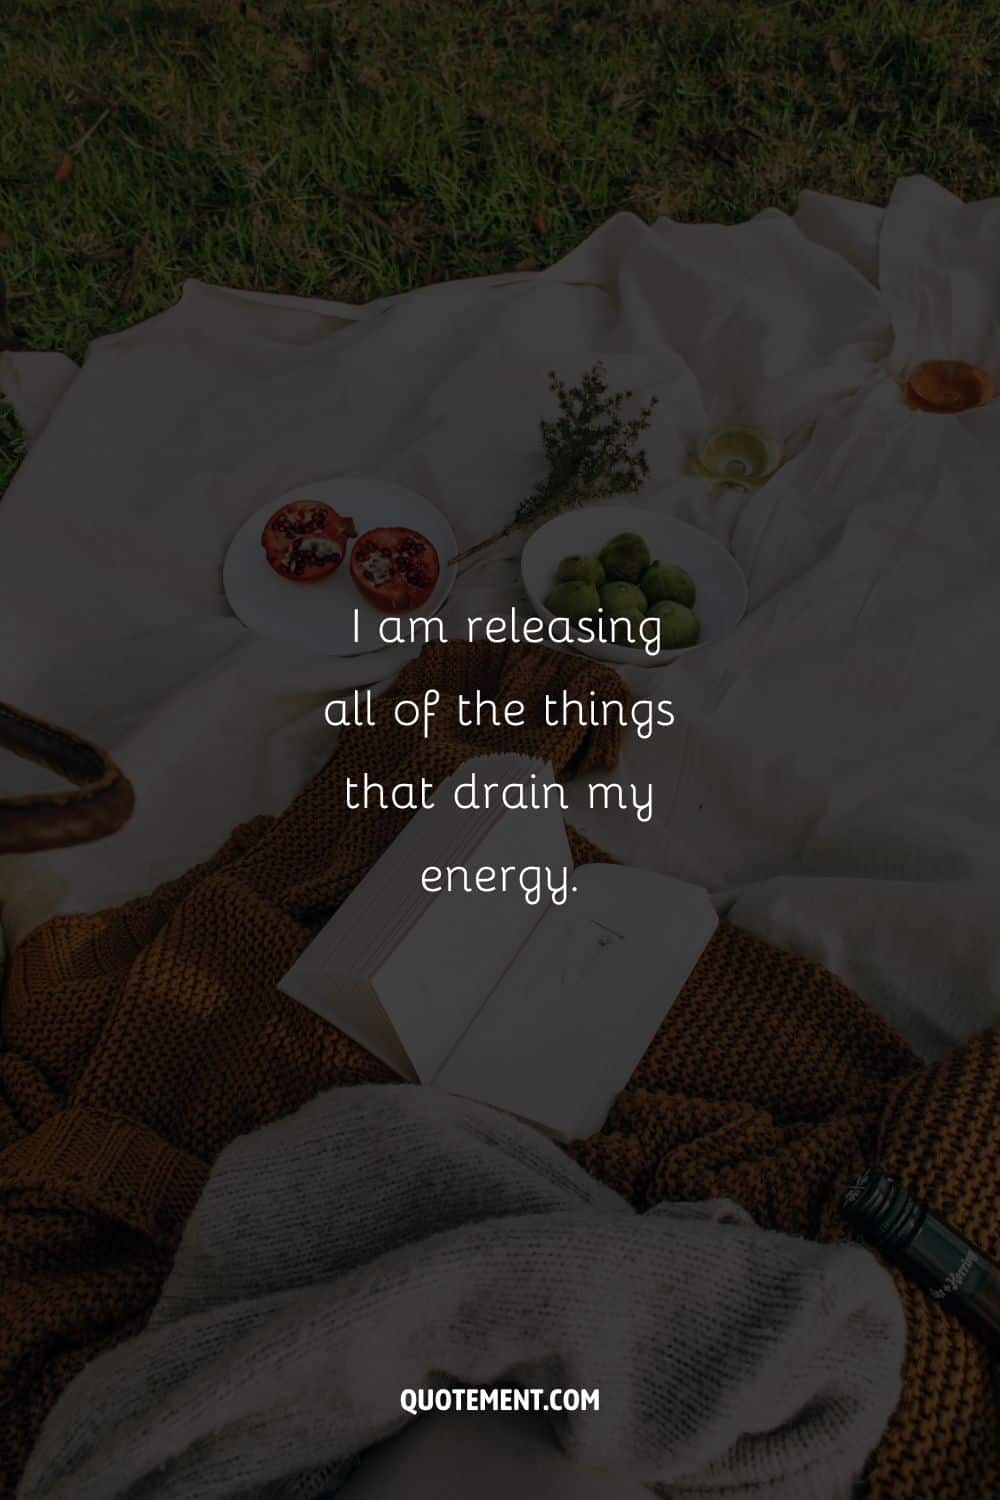 Image of a blanket, book and juicy fruits representing a relaxing affirmation